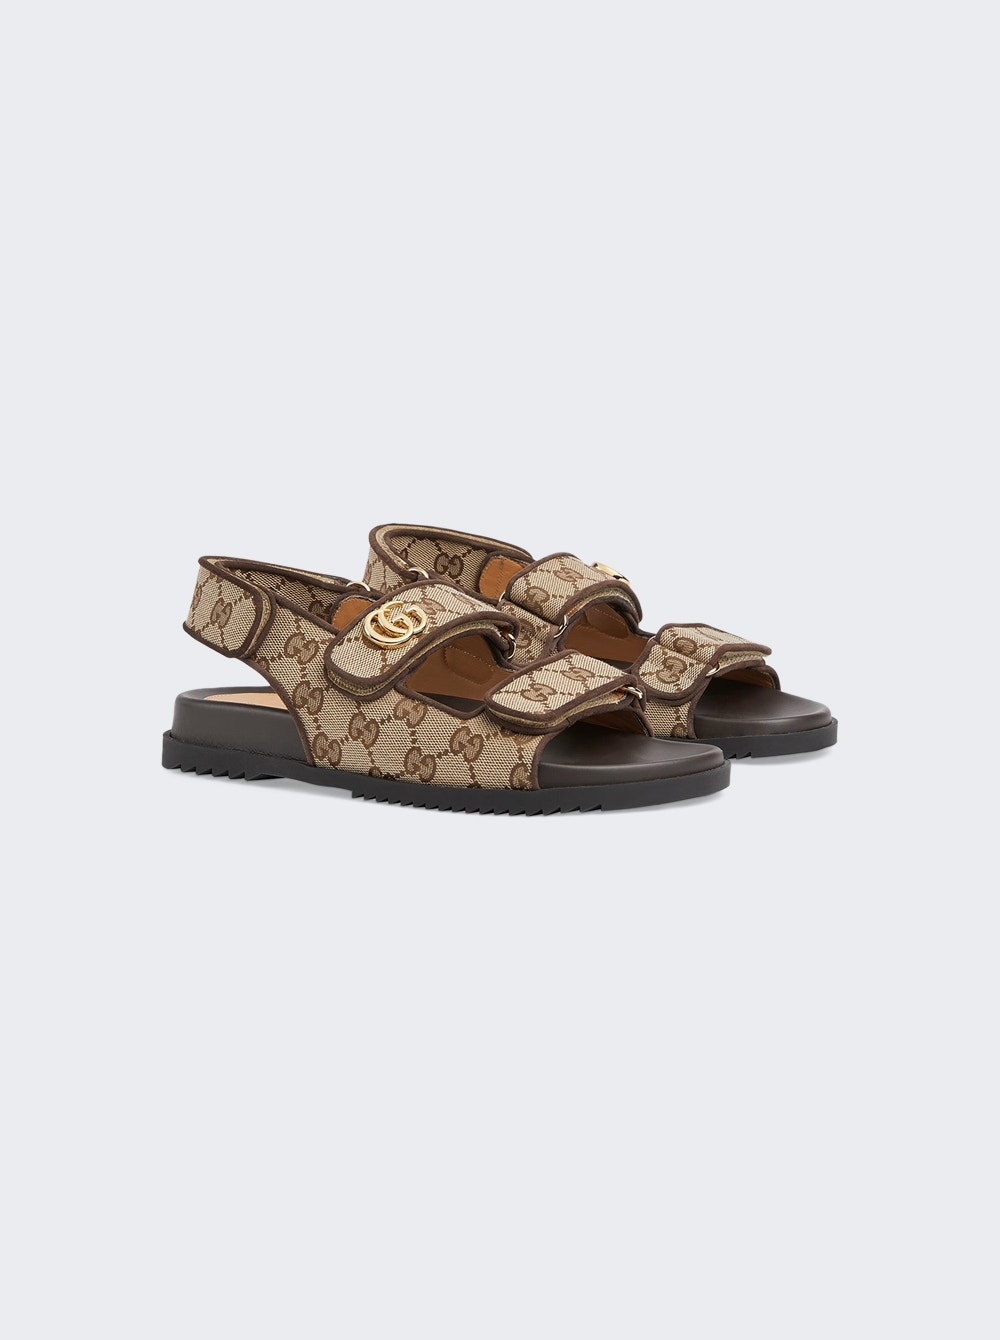 Sandal With Double G Tan - 2